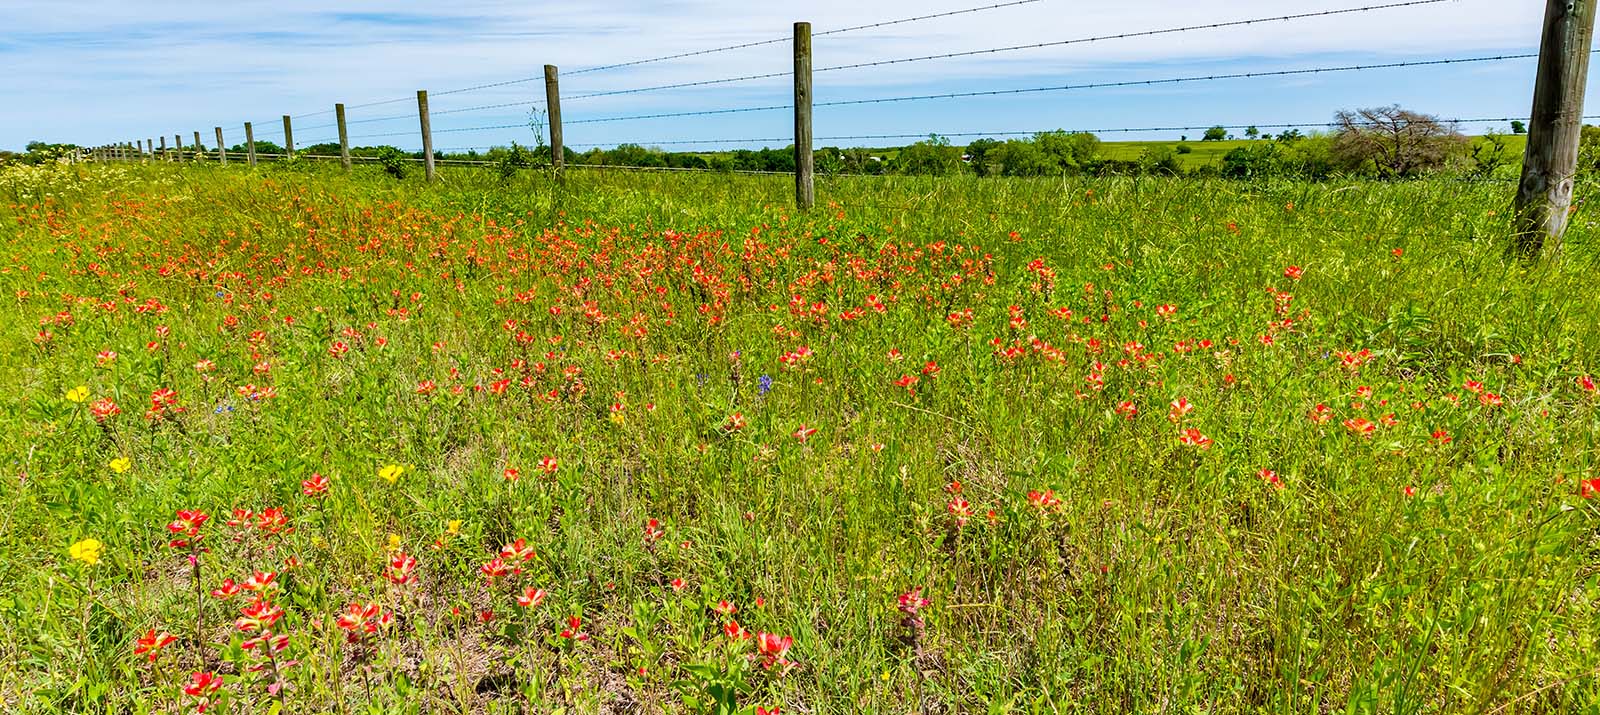 A rural Texas land with wildflowers